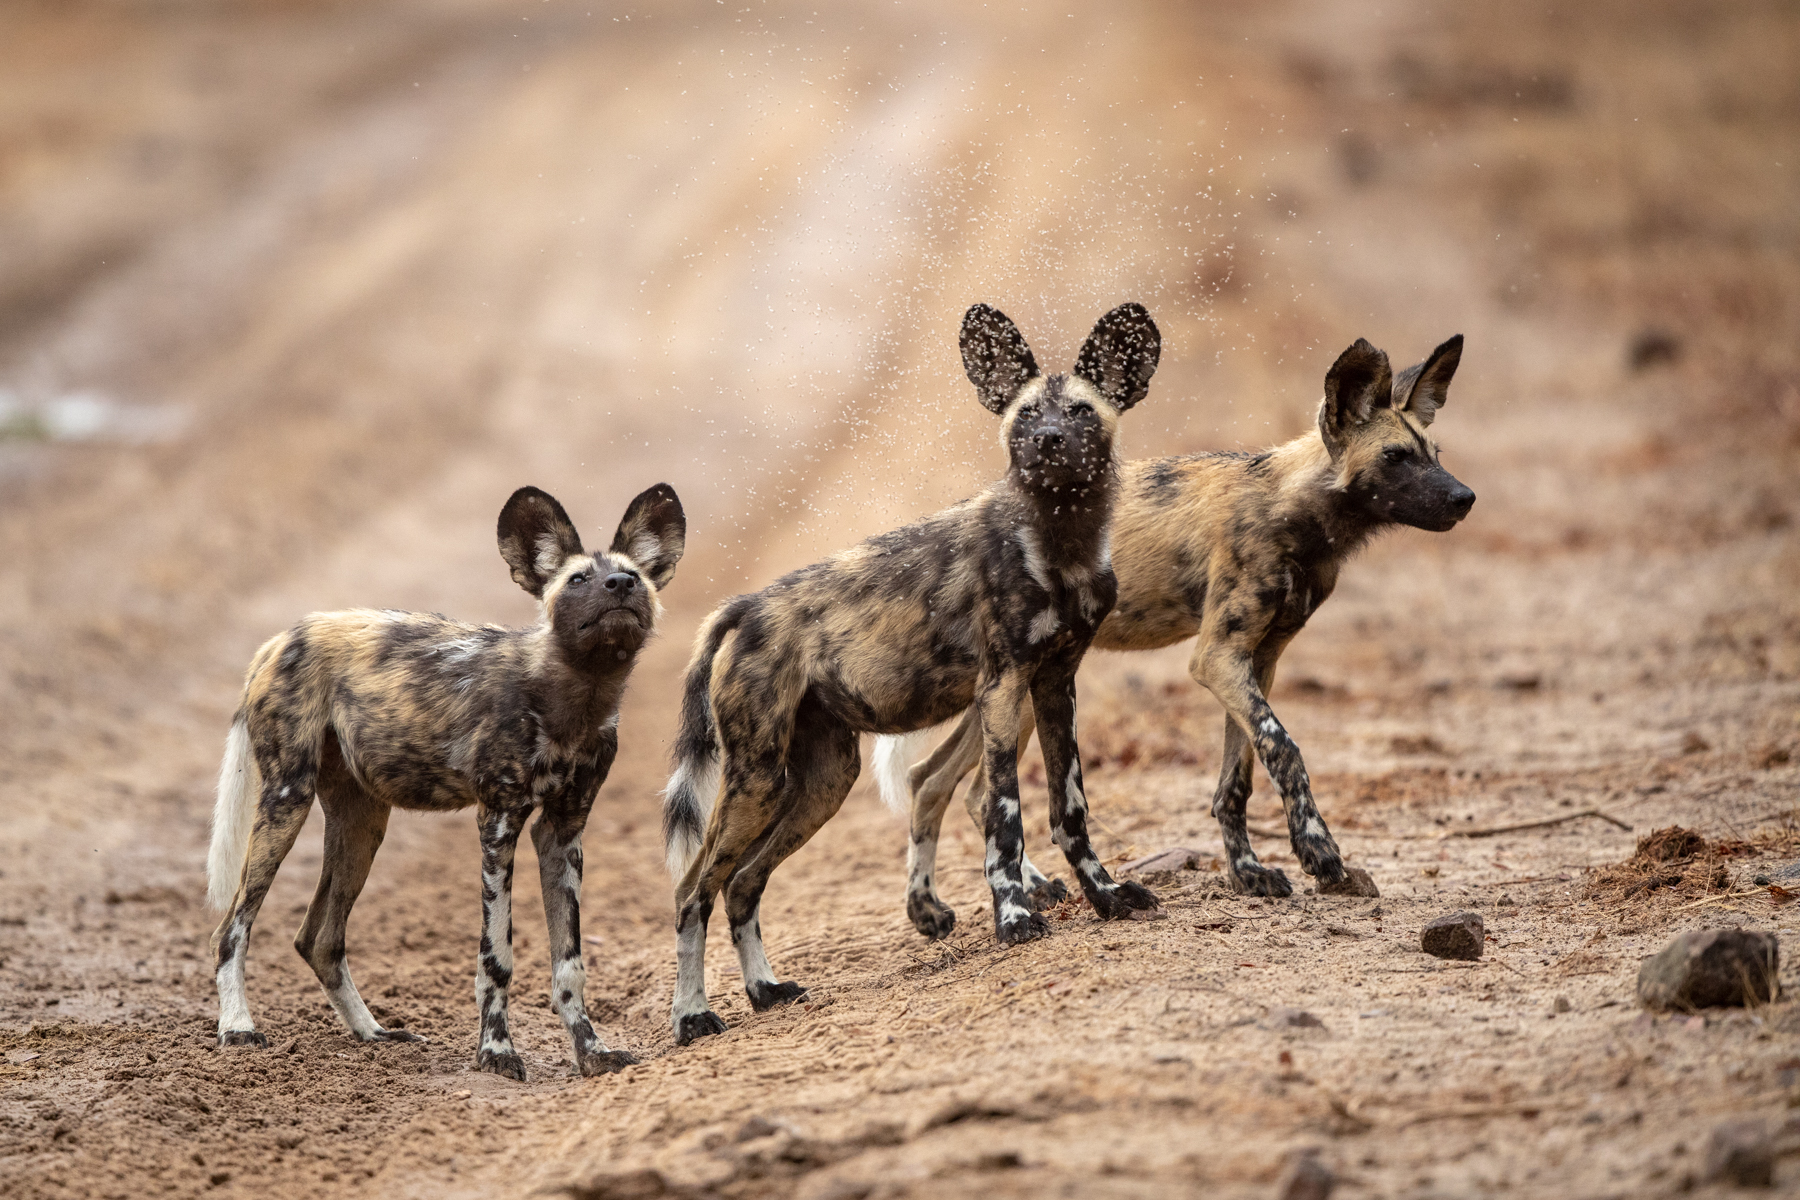 We hate those flies! Painted Wolvces (or African Wild Dogs) observe their tormentors